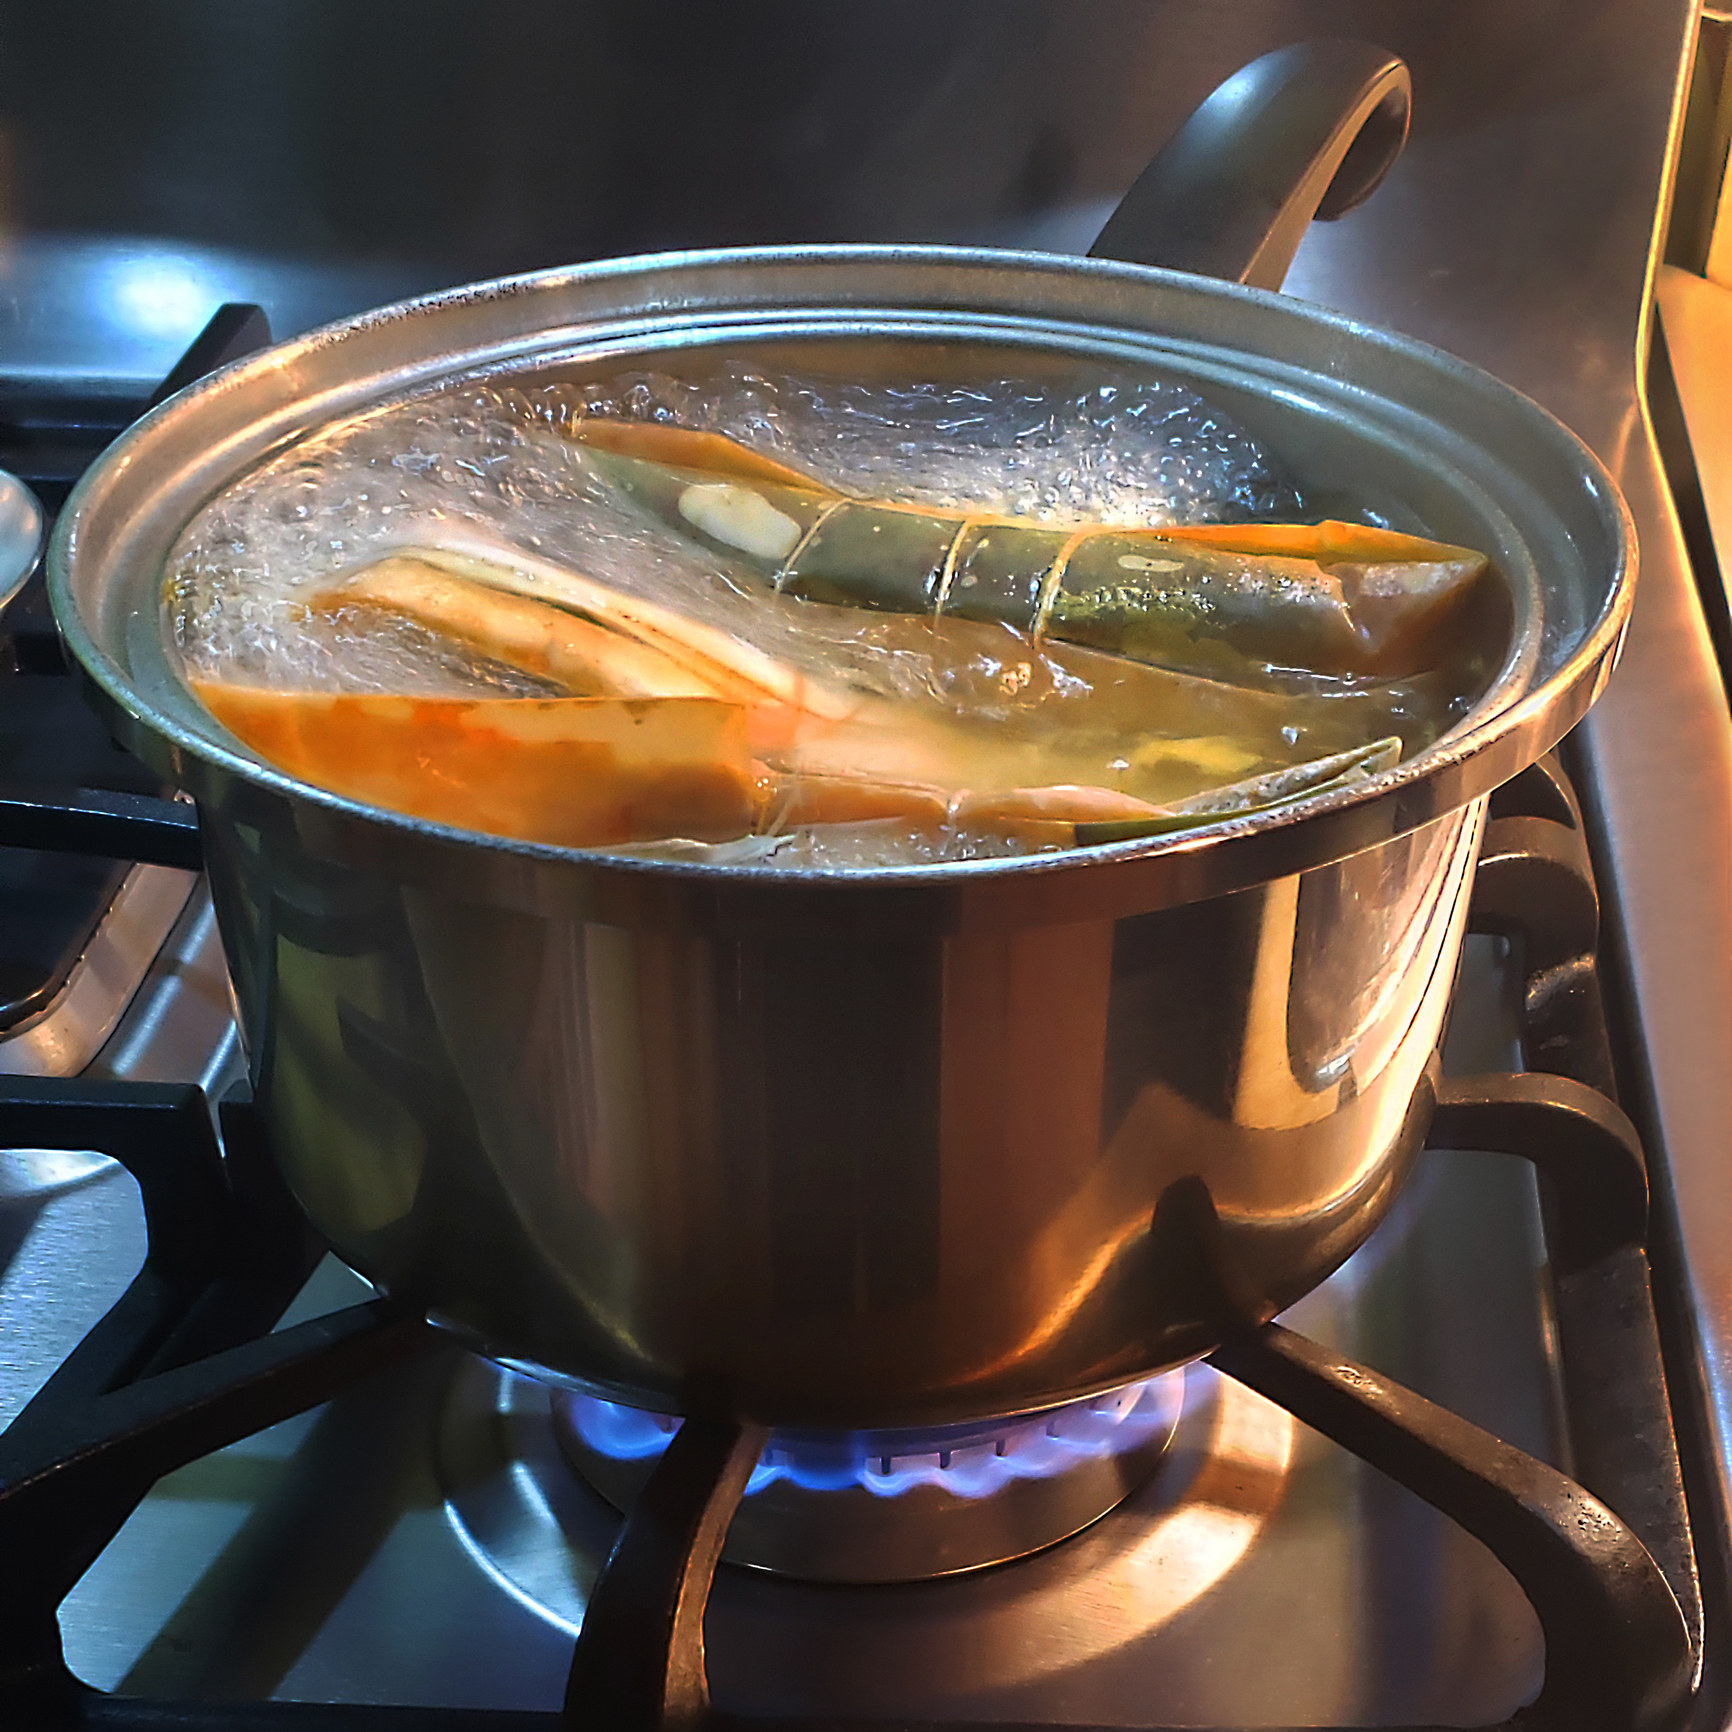 Pasteles cooking in a pot on a stove.